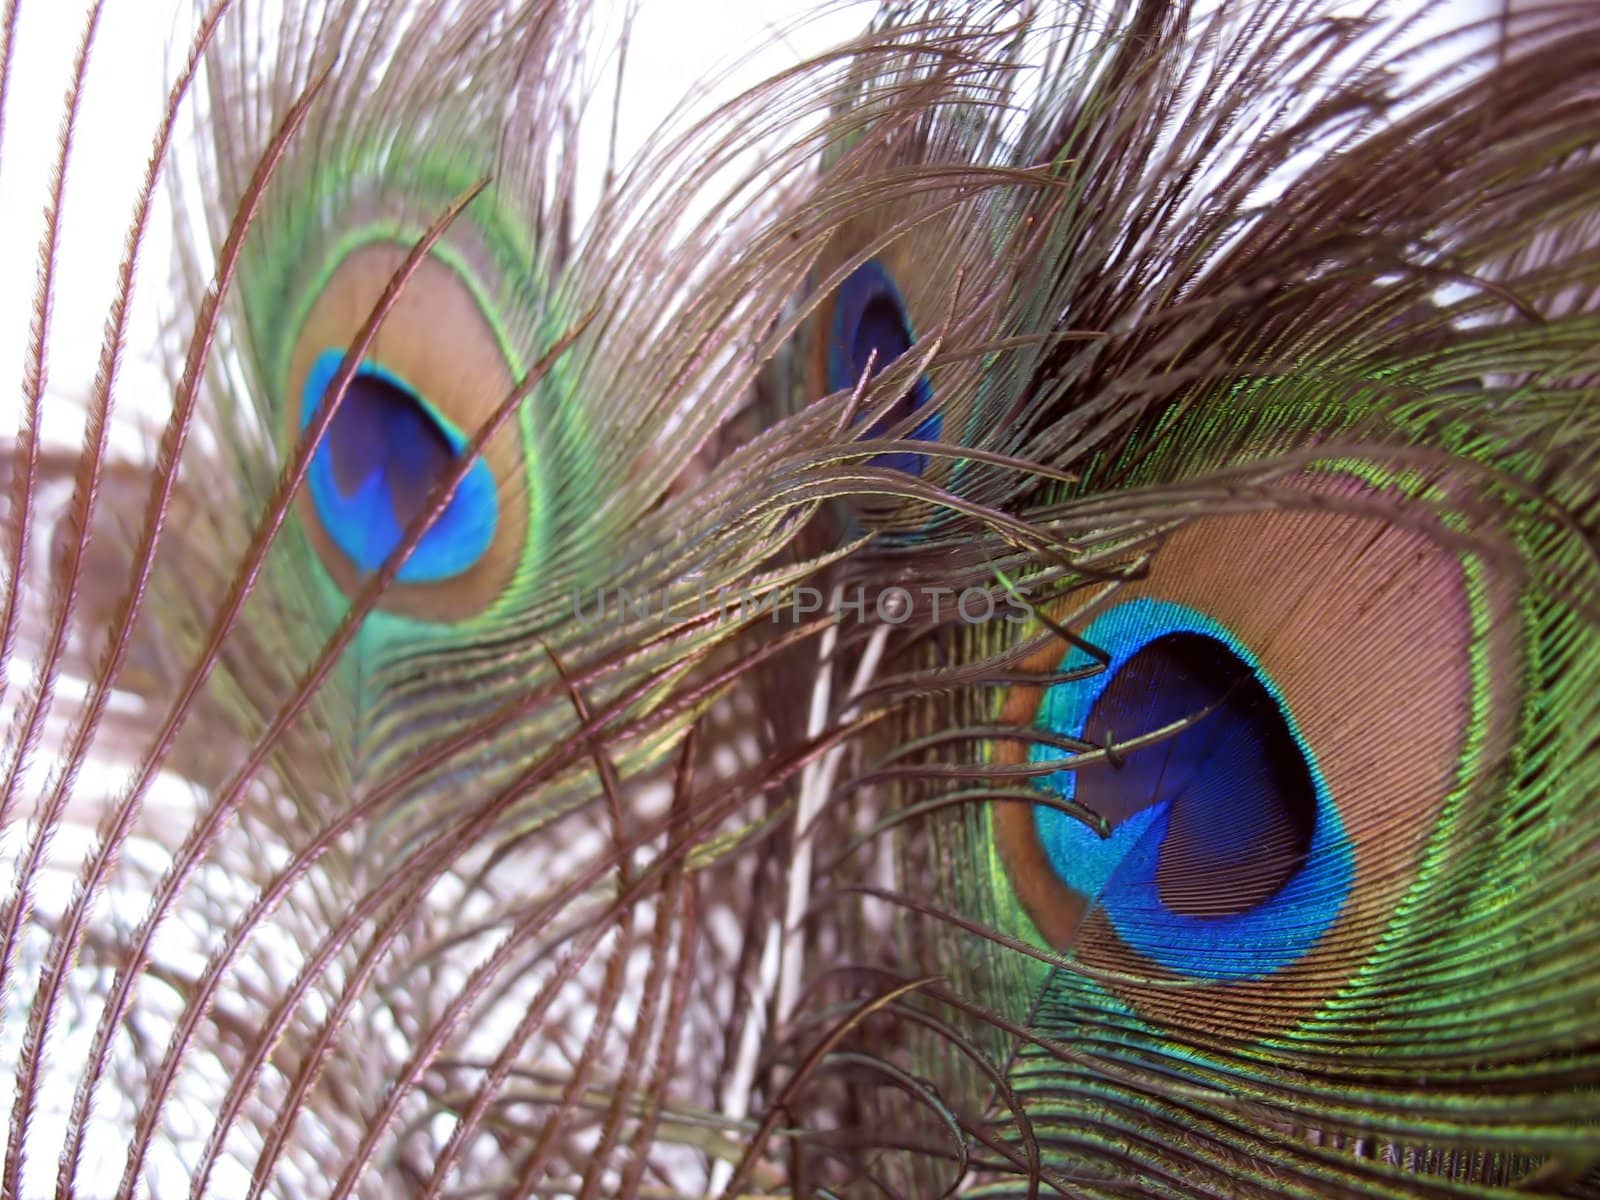 a nice arrangement of peacock feathers over white